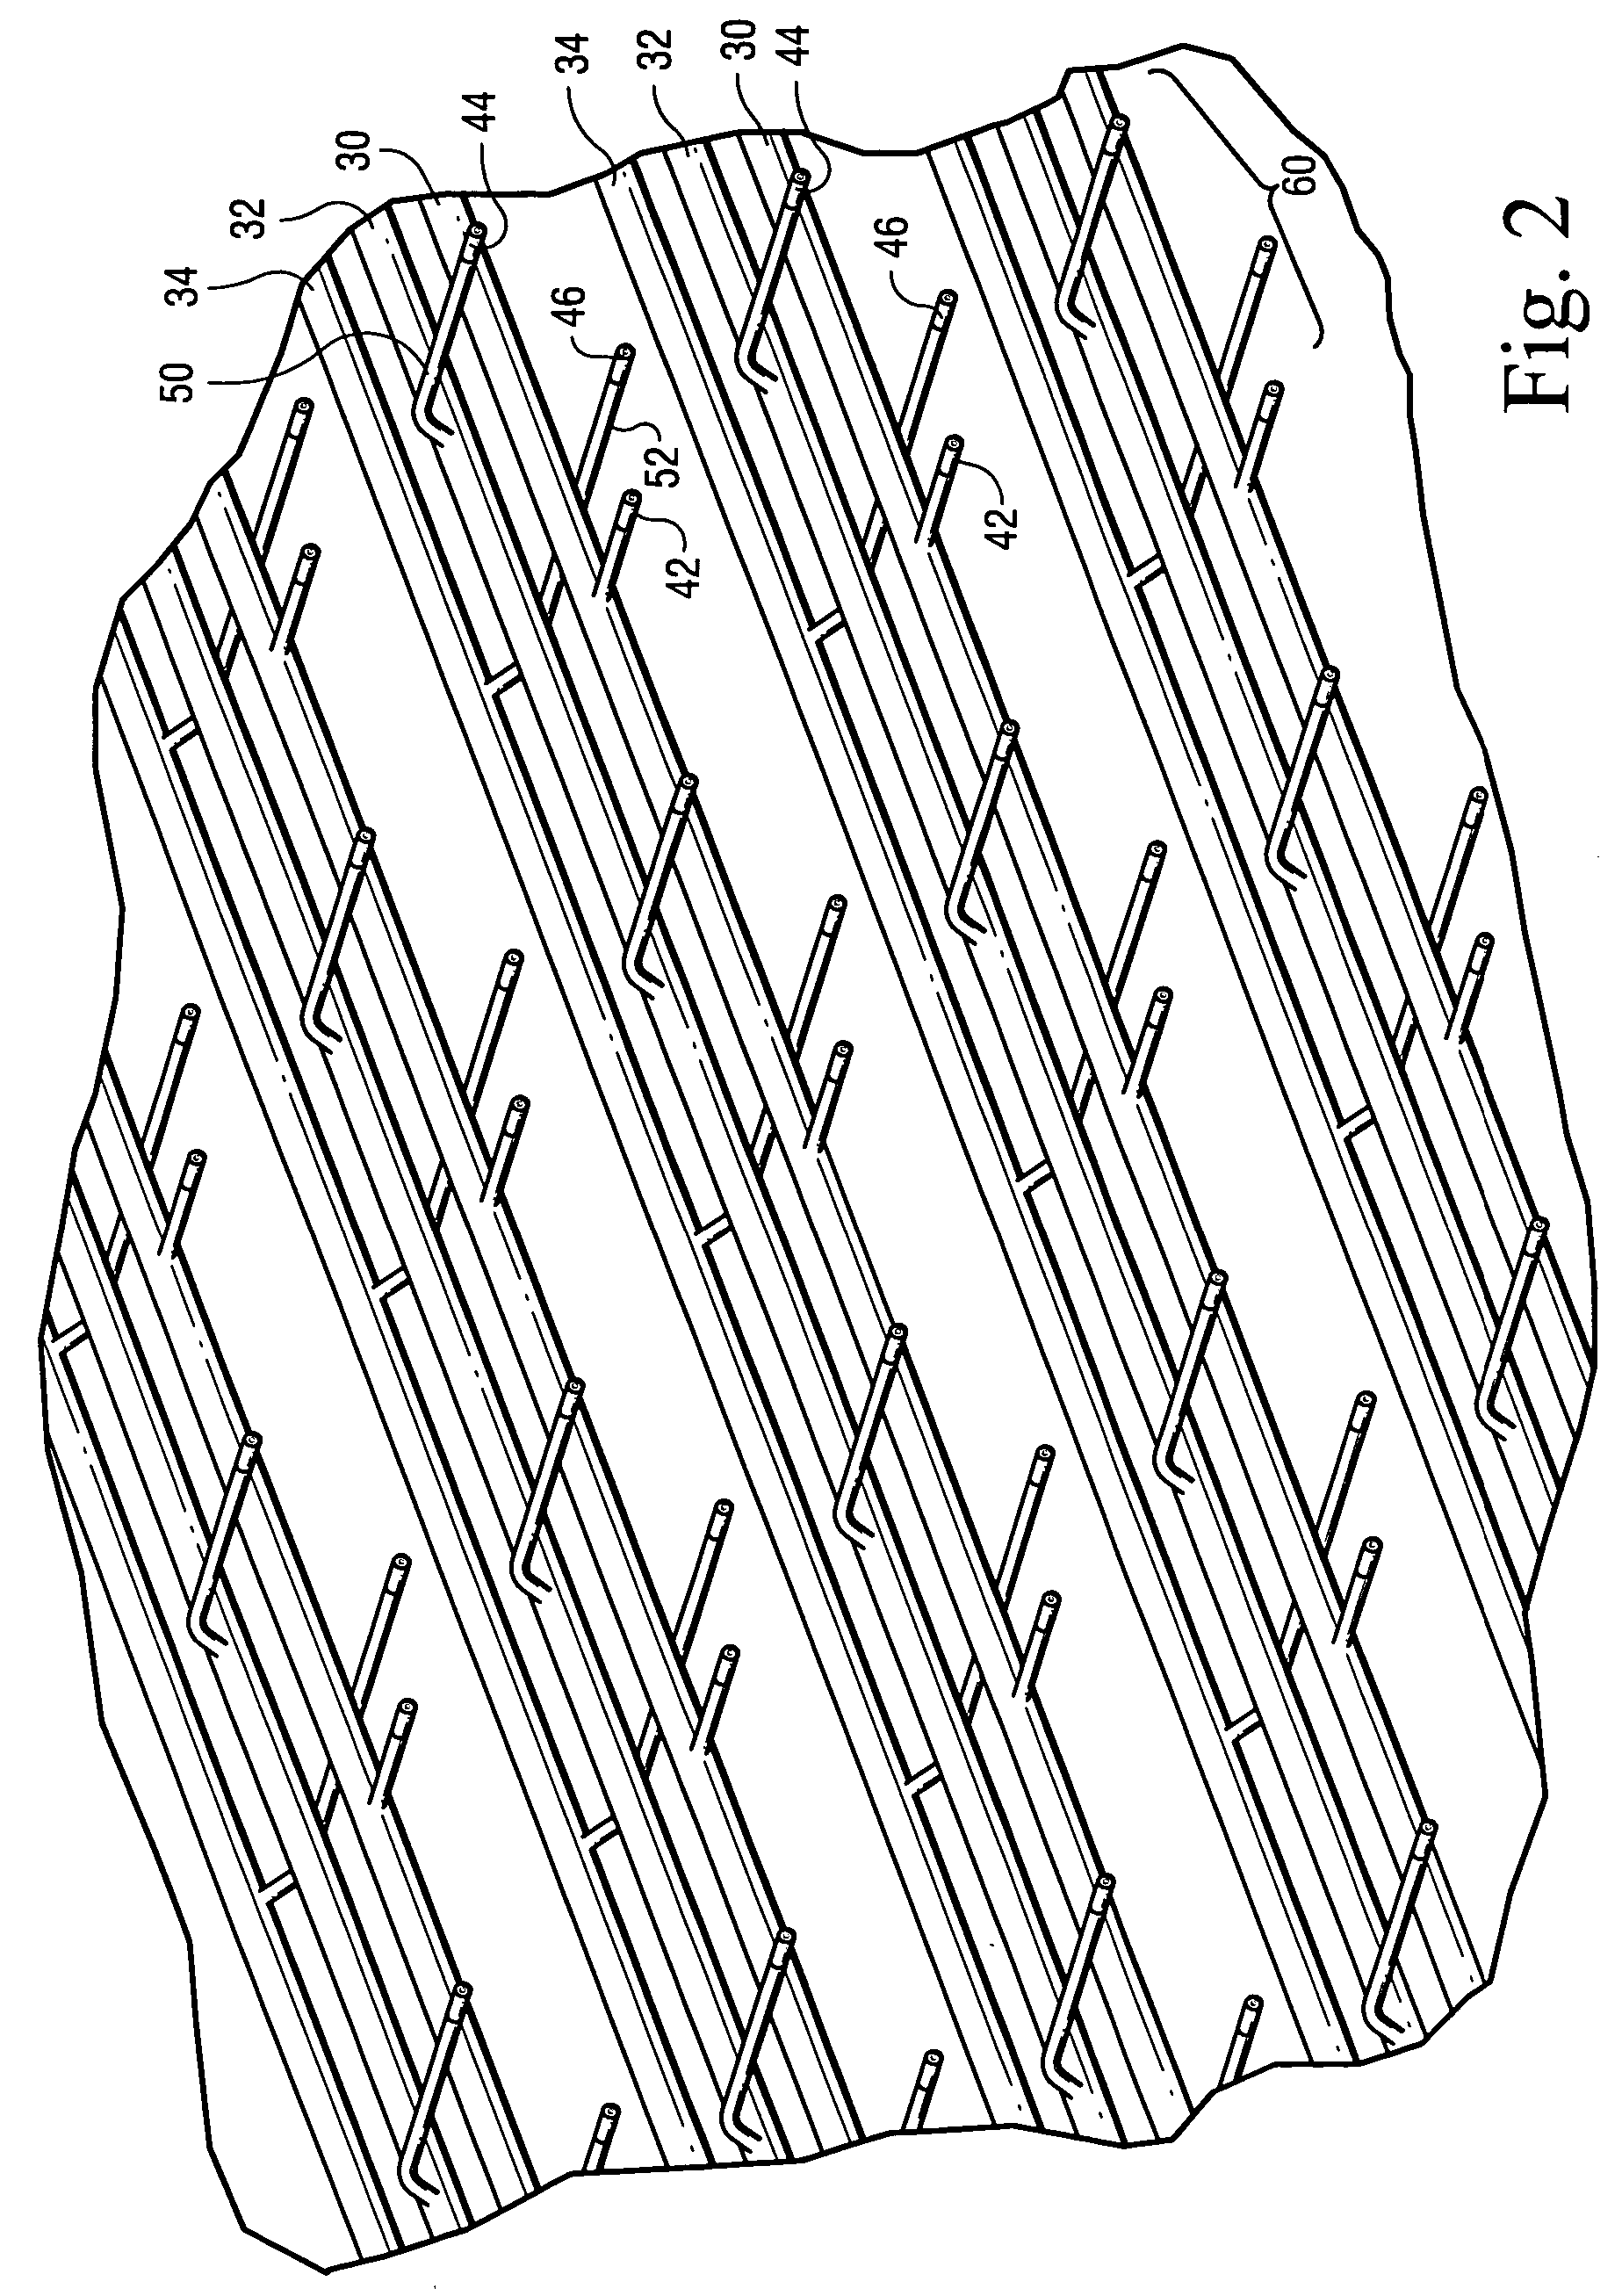 Spray nozzle grid configuration for gas turbine inlet misting system